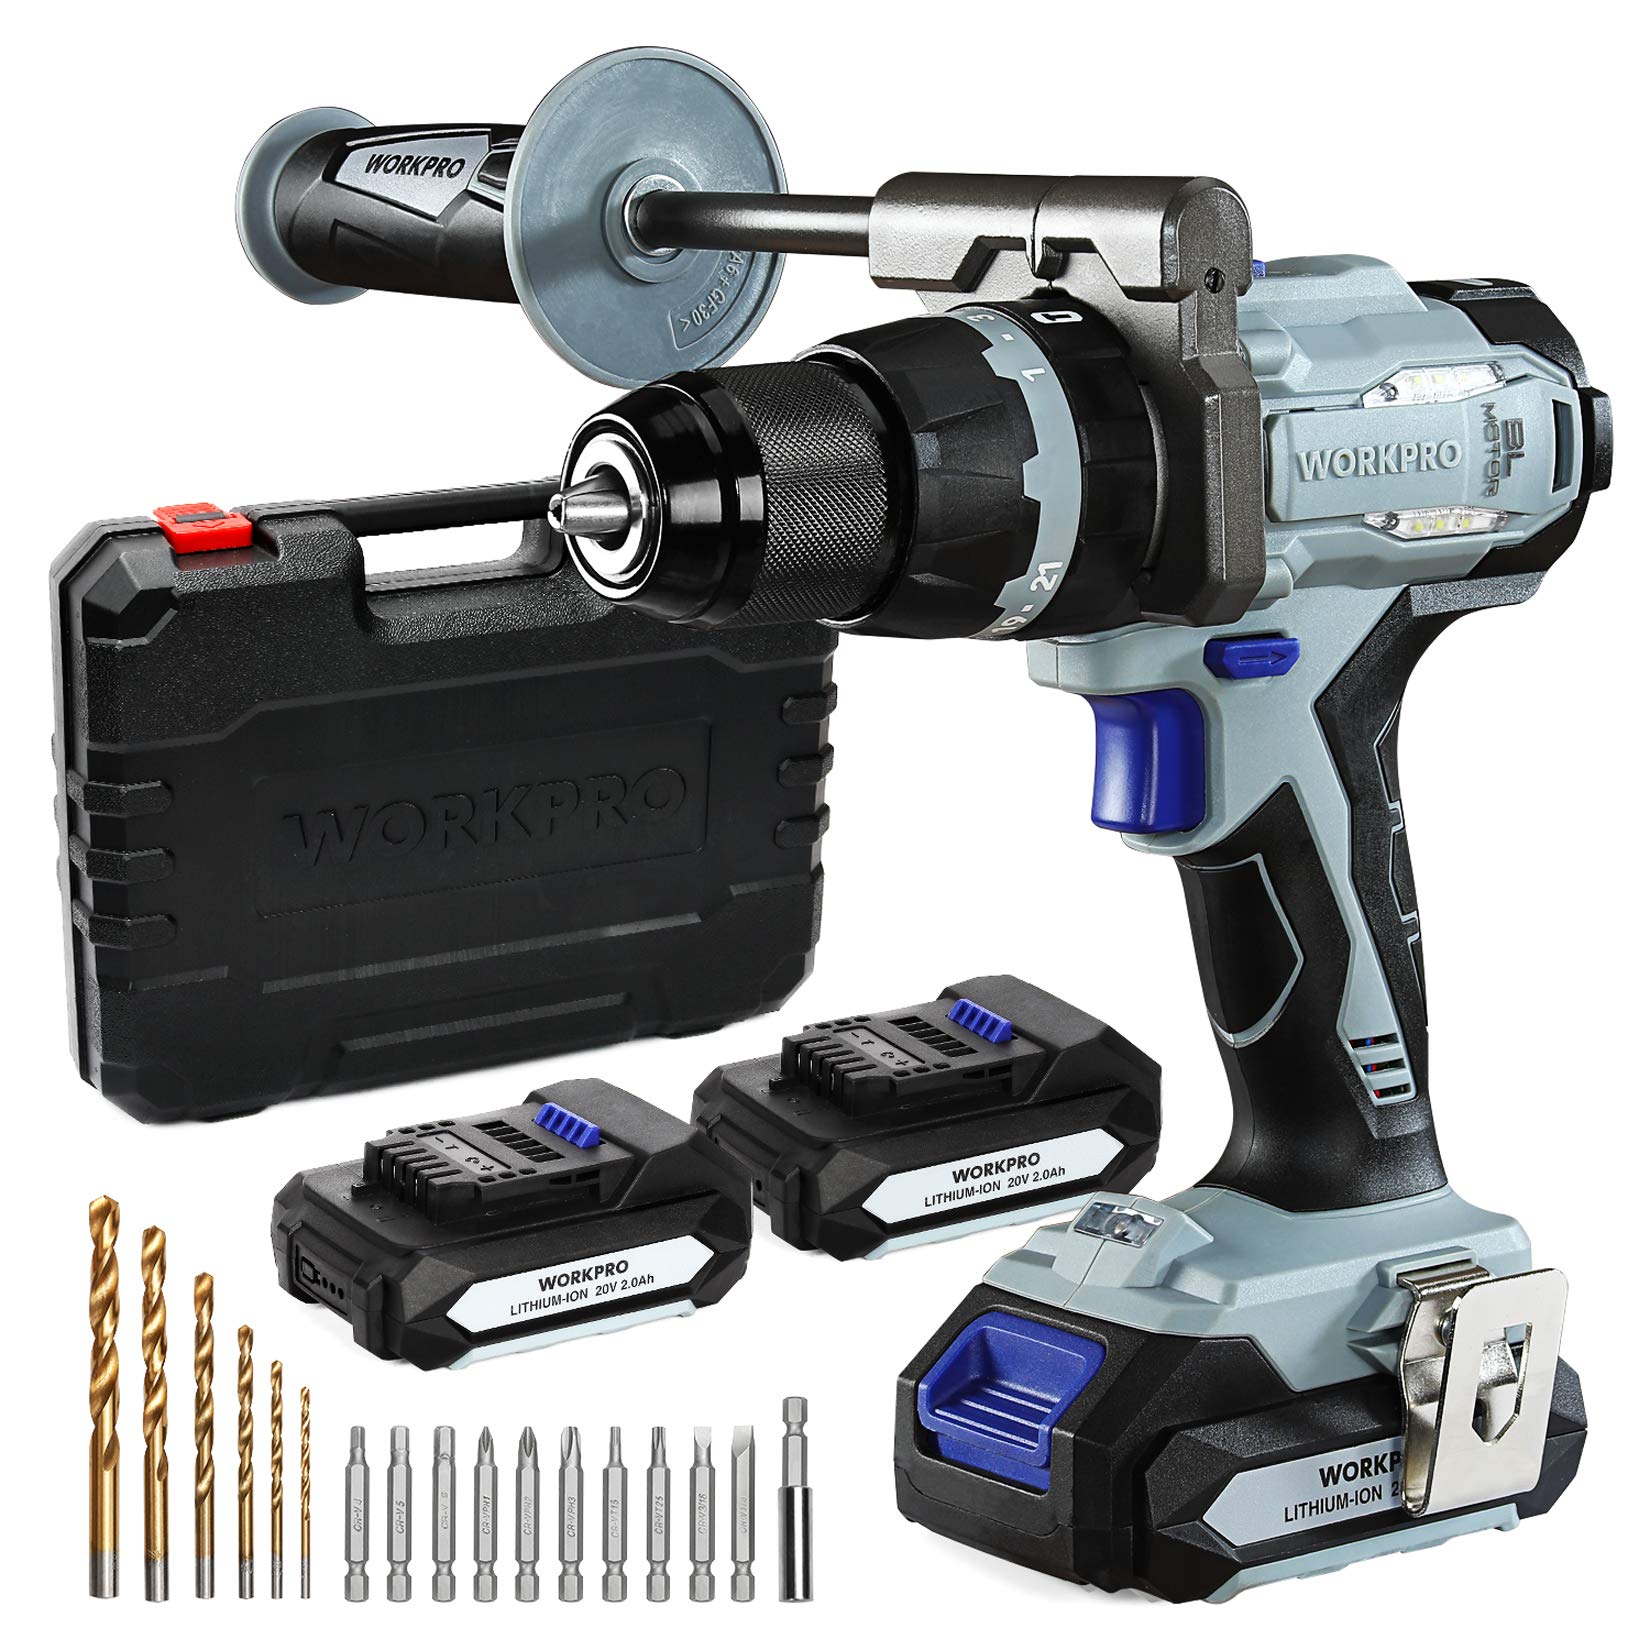 WORKPRO 20V Brushless Cordless Drill, with 2 Batteries(2.0 Ah) and Auxiliary Handle, 487 IN-LBS 21+3 Torque Setting, 1/2” Chuck, 21 Pieces Drill Driver Kit with Hard Carrying Case